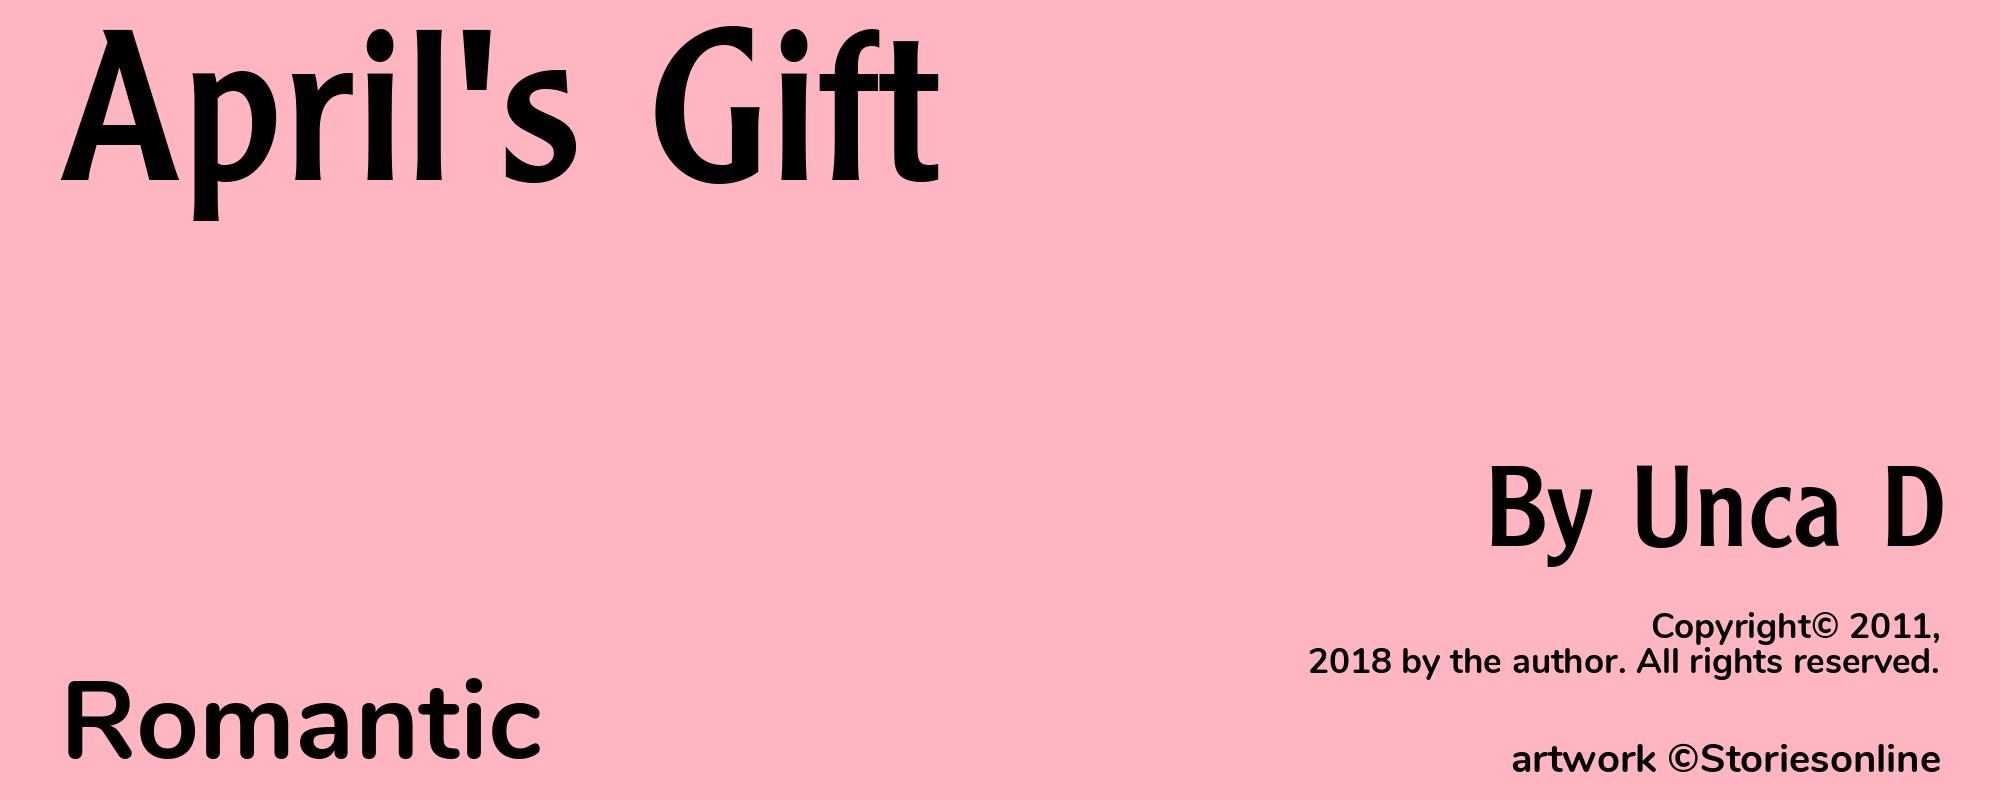 April's Gift - Cover